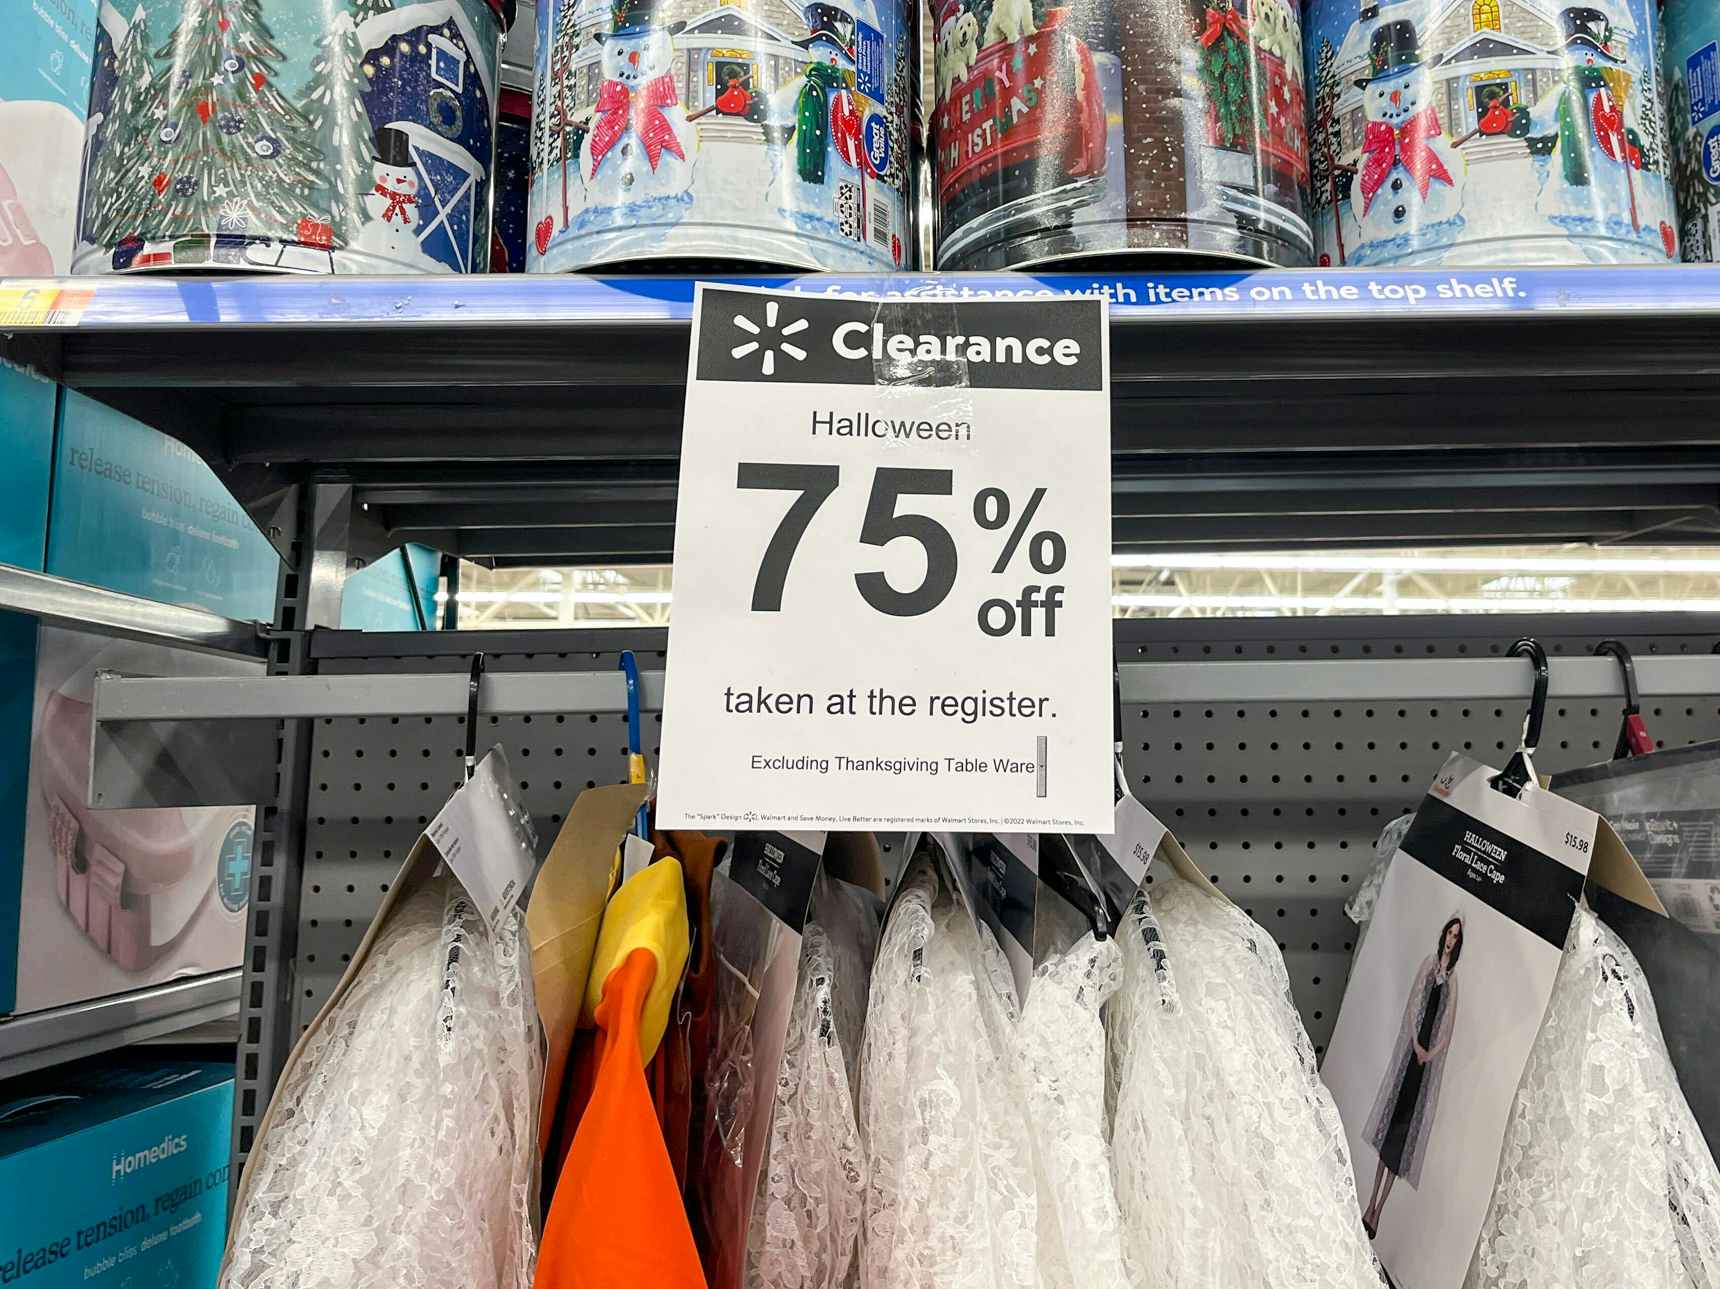 A 75% off clearance sign in the Halloween costume section in Walmart